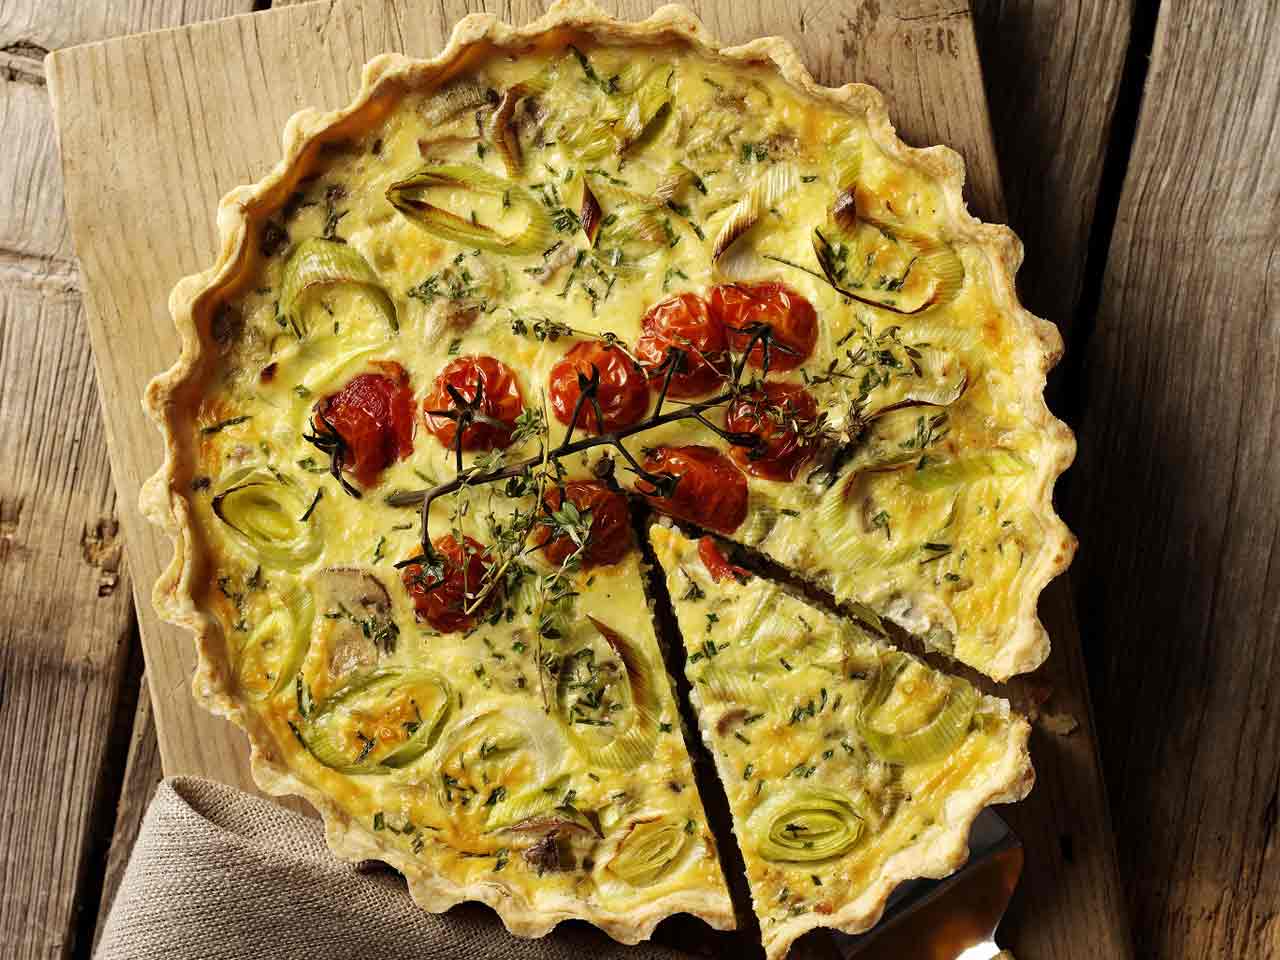 Mushroom and vegetable quiche